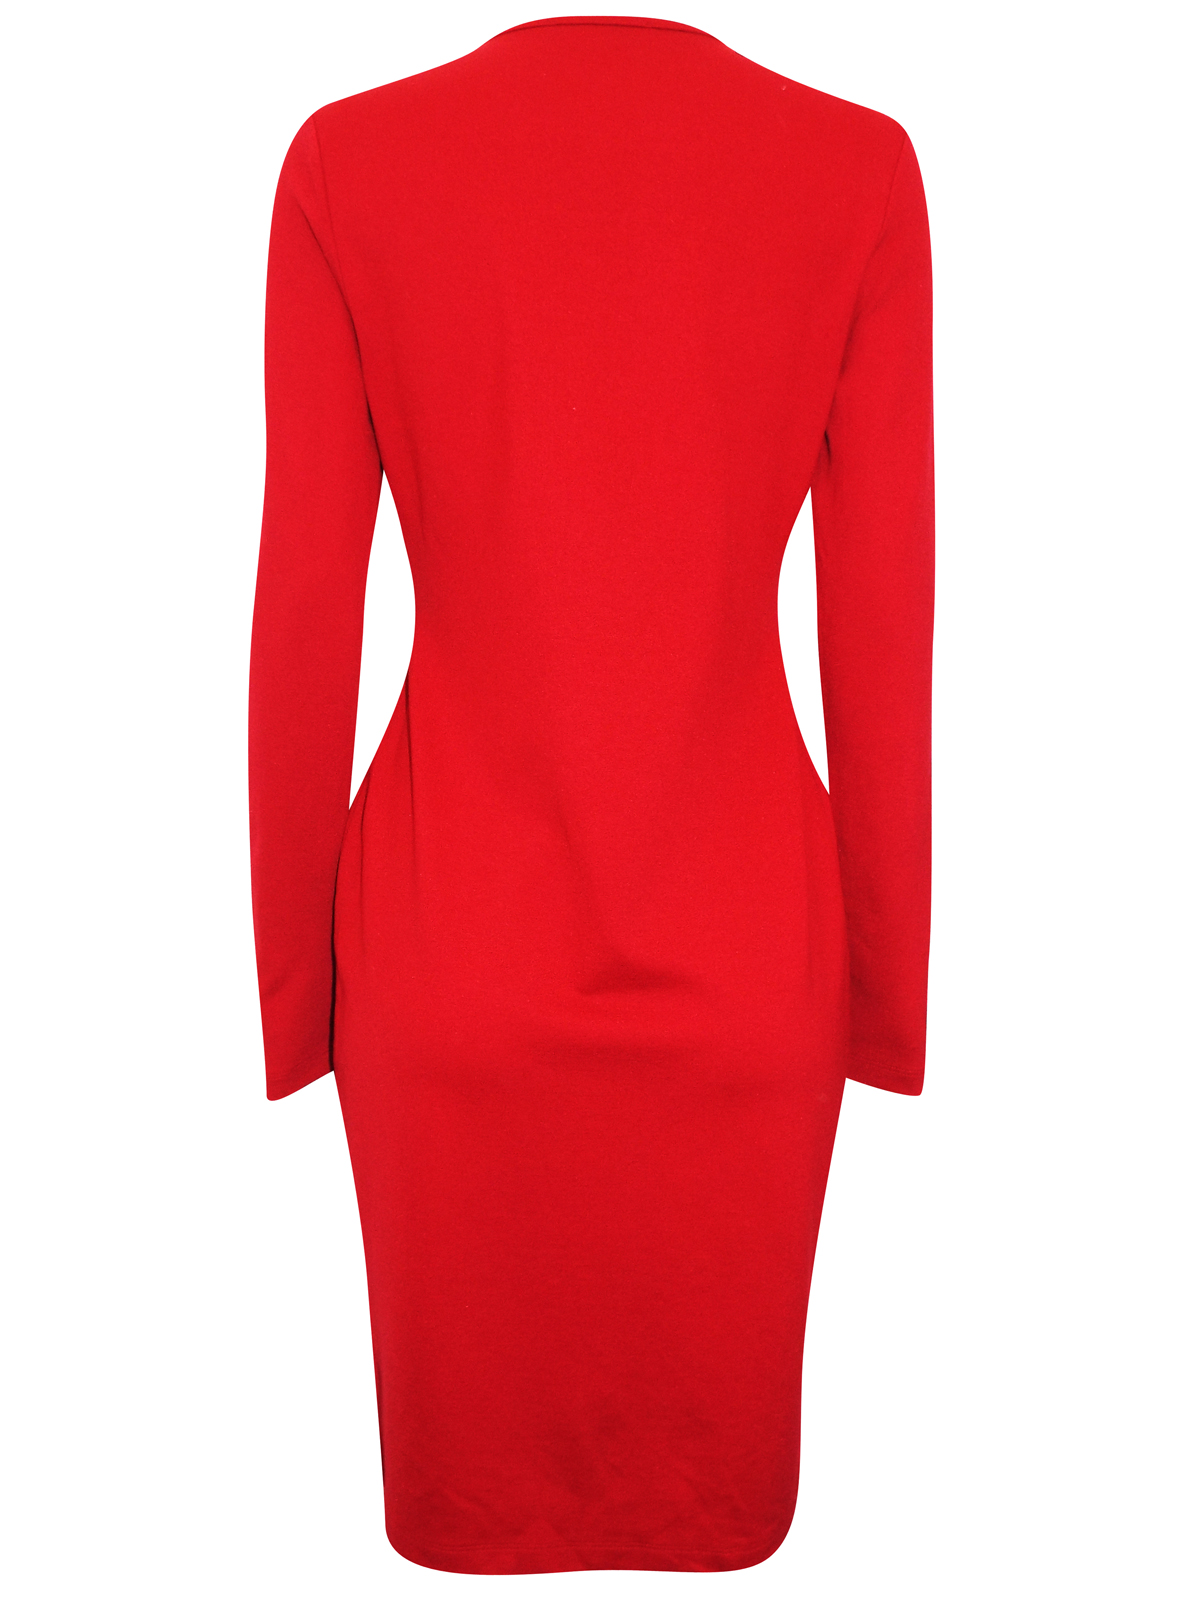 Marks and Spencer - - M&5 CHEERY RED Slimming Fit Body Contour V-Neck ...